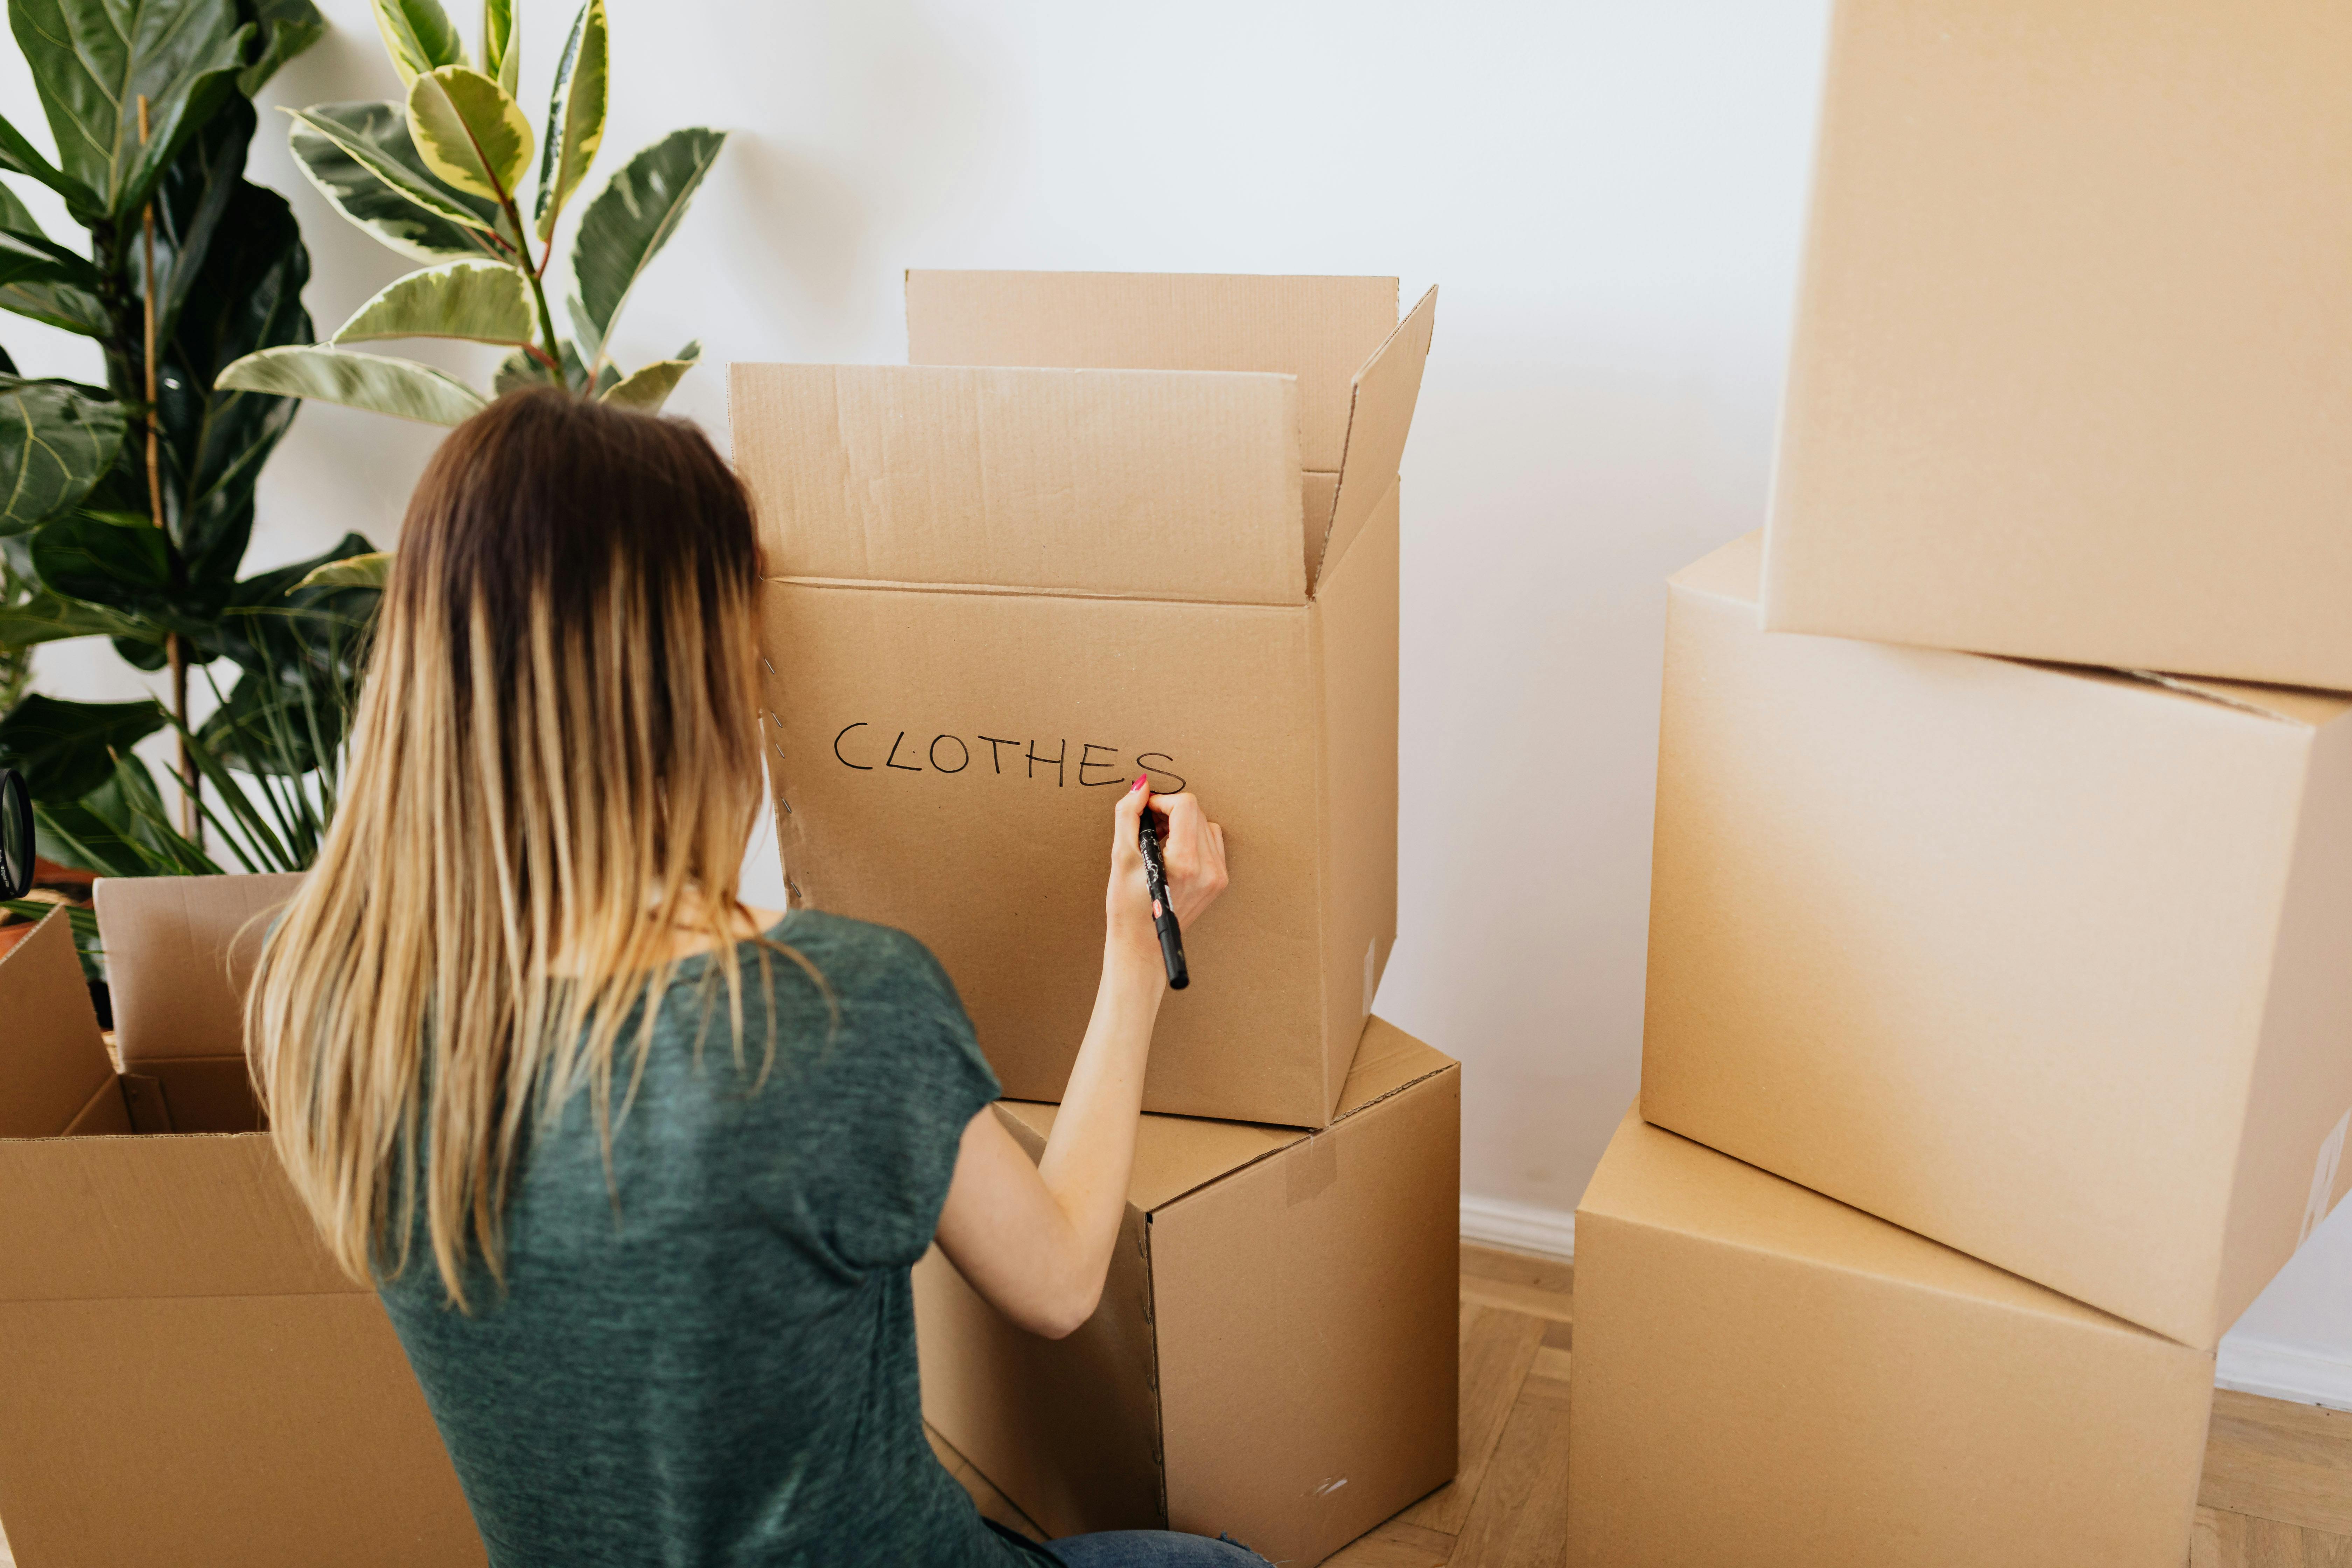 A woman writing the word clothes on a carton box | Source: Pexels